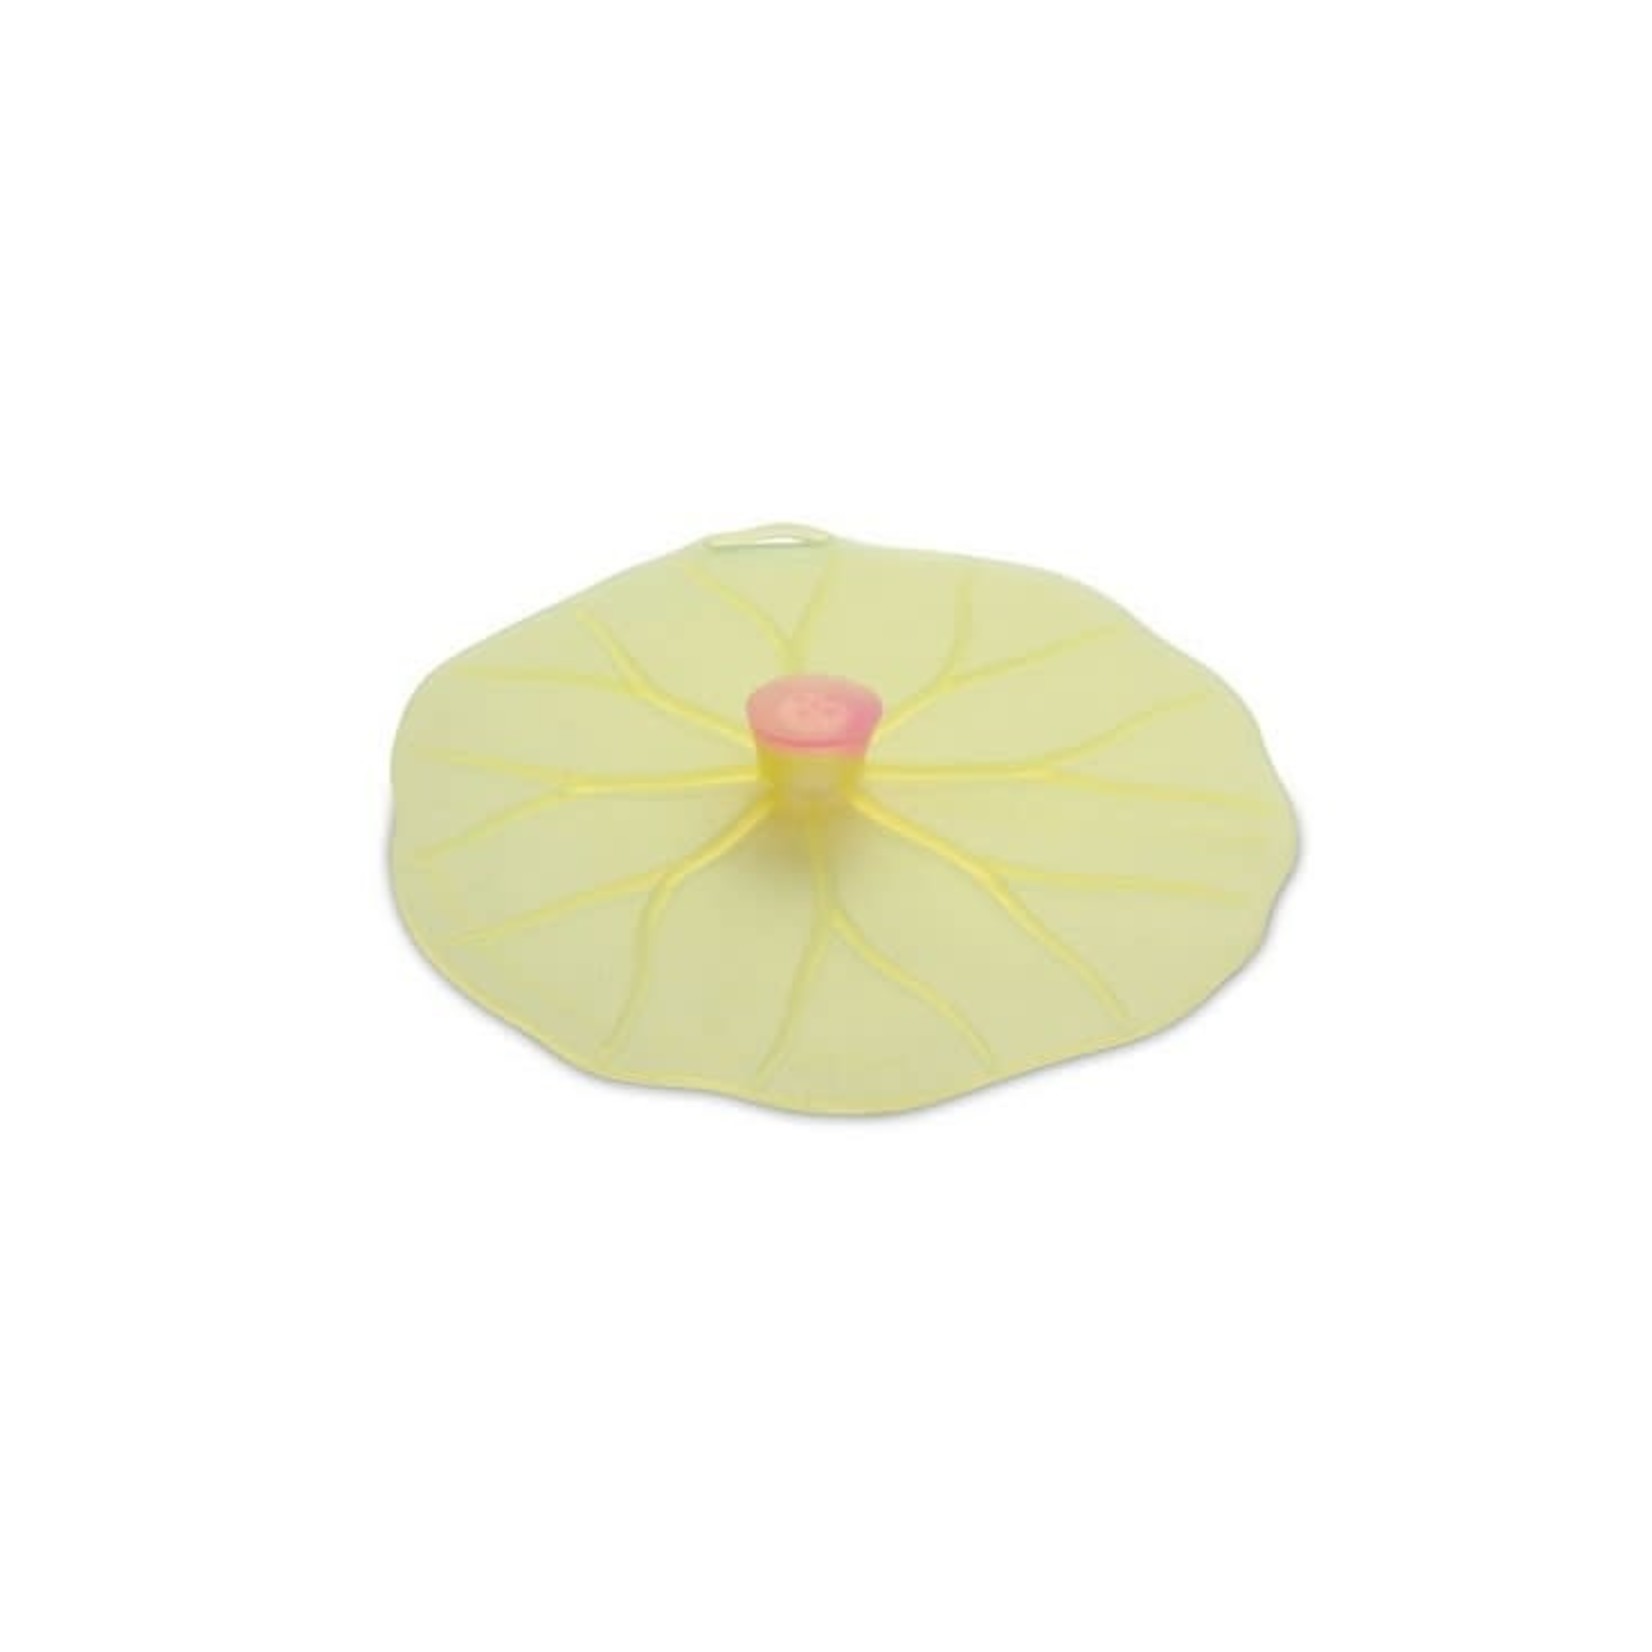 CHARLES VIANCIN CHARLES VIANCIN Floral Silicone Lids Small S/2